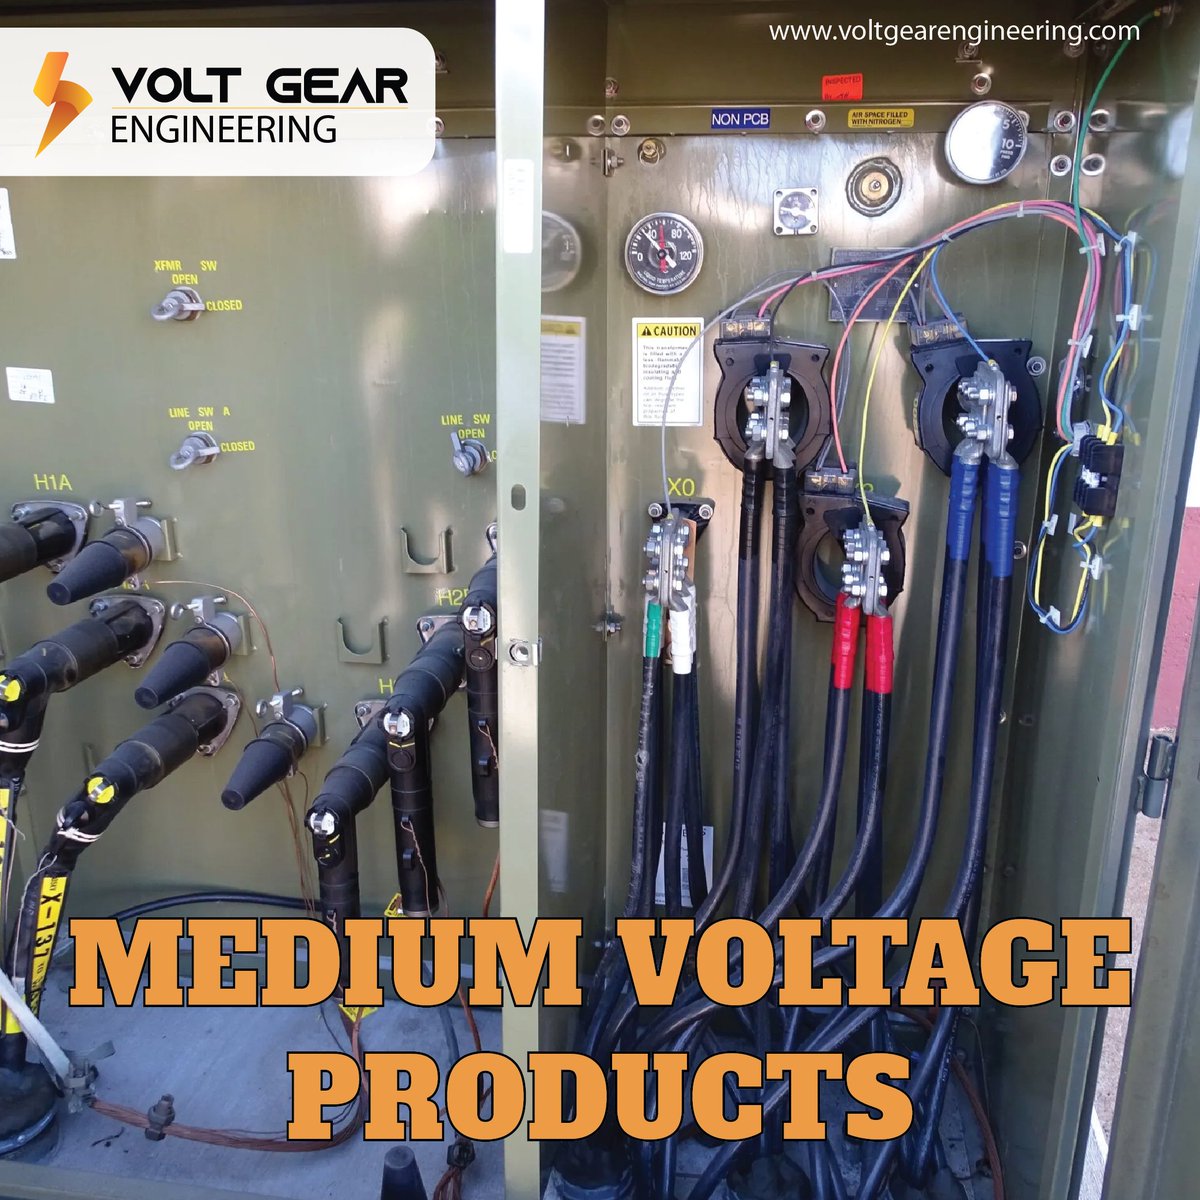 Empower your operations with our state-of-the-art medium voltage products. From reliable switchgear to advanced protection systems, we've got the solutions to elevate your energy infrastructure. ⚡🔌
.
.
#mediumvoltageproducts #voltgearengineering #EnergySolutions